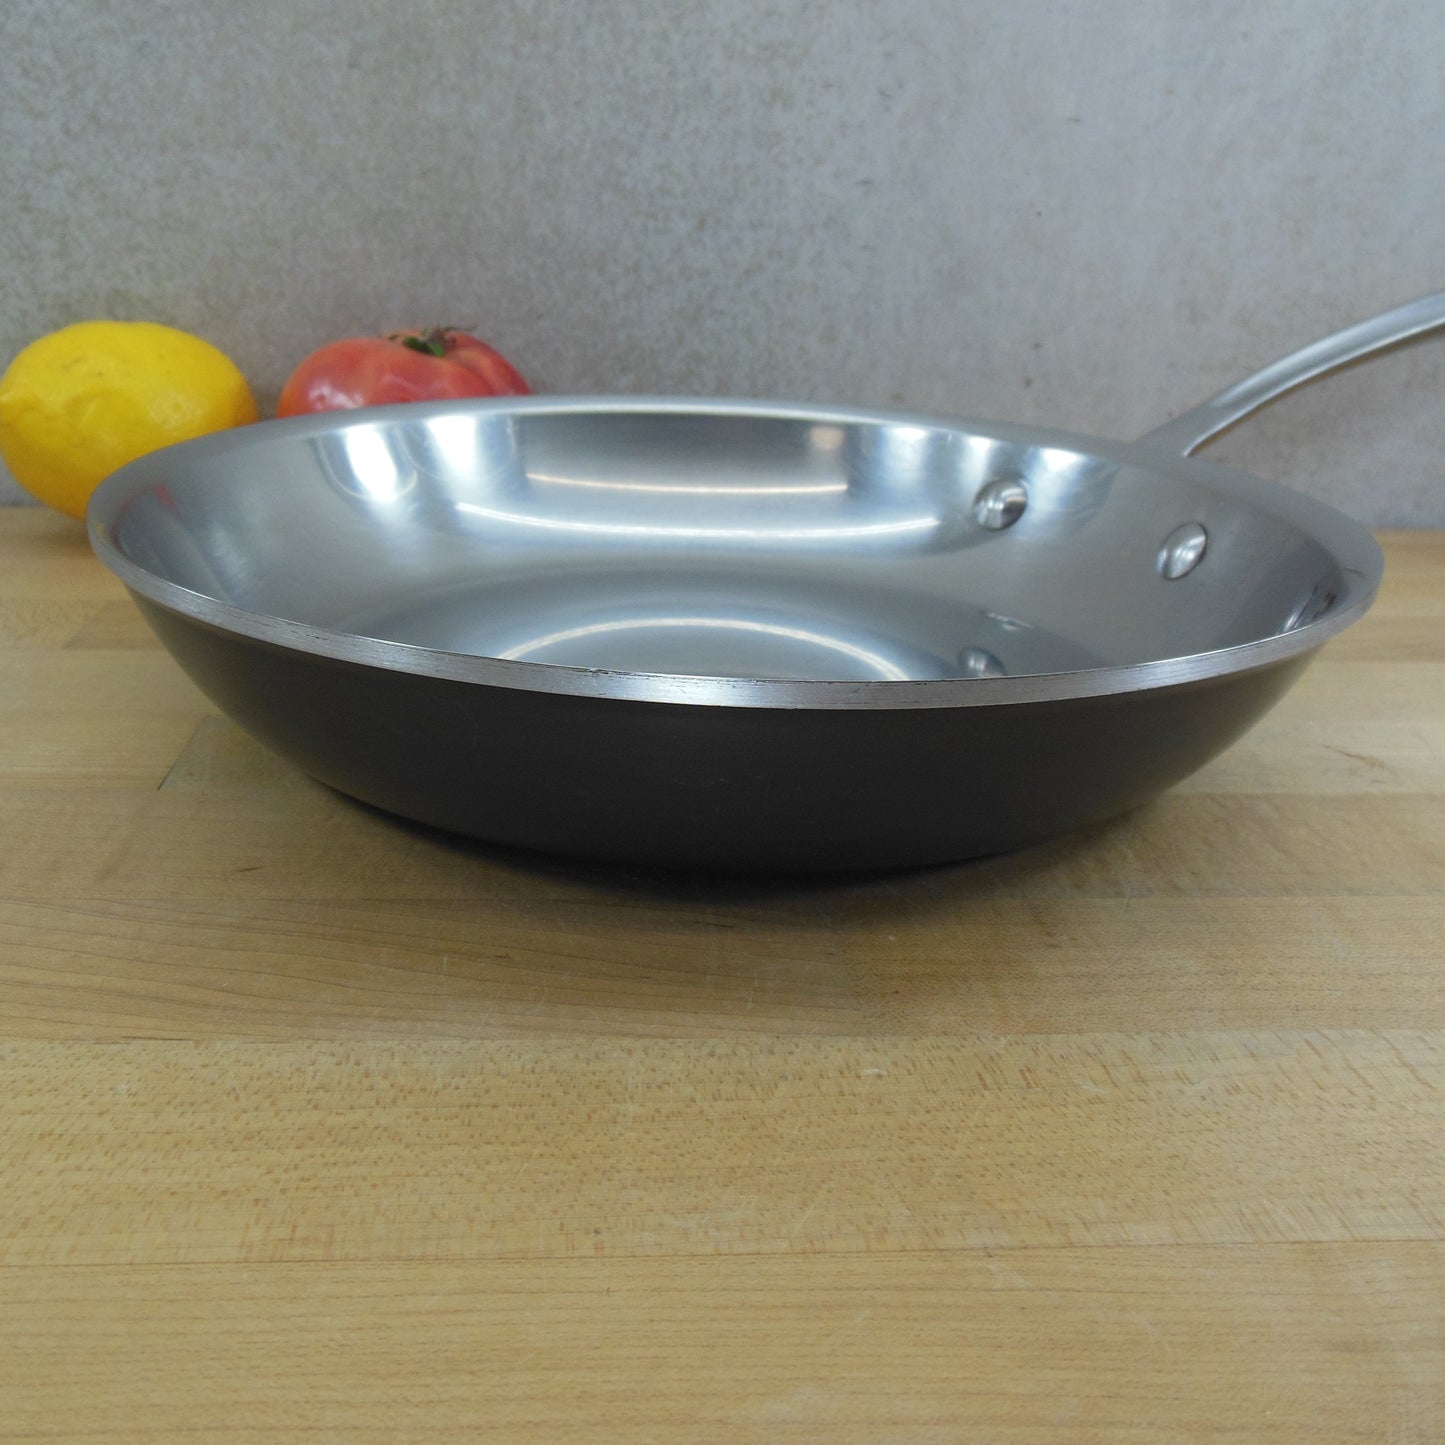 All-Clad Ltd. USA Anodized Stainless 10" Fry Pan Skillet Vintage